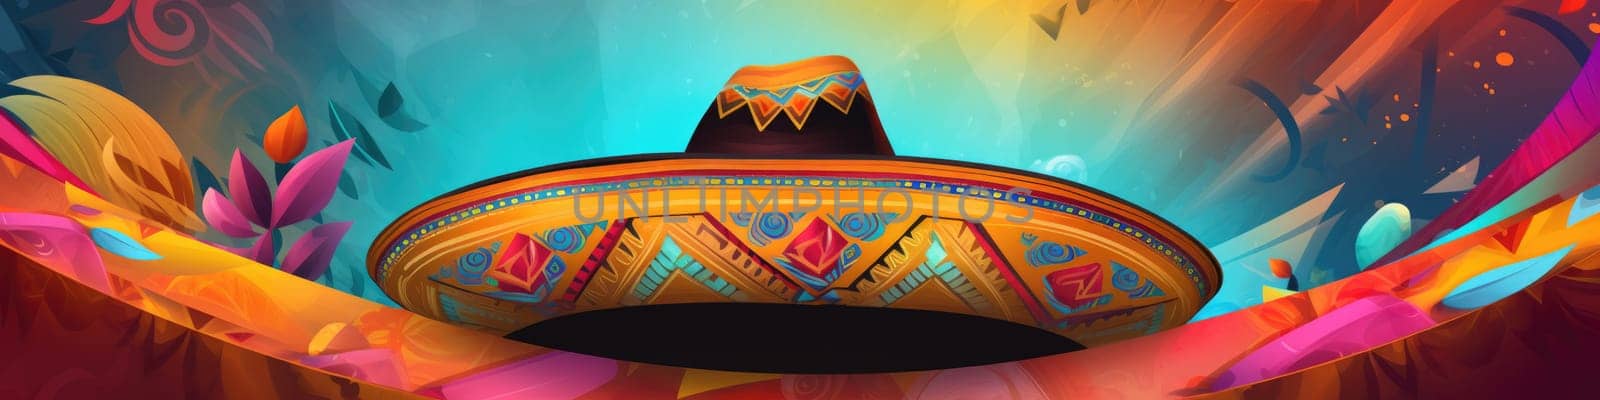 Mexican cartoon art sombrero on the colorful background banner by Kadula